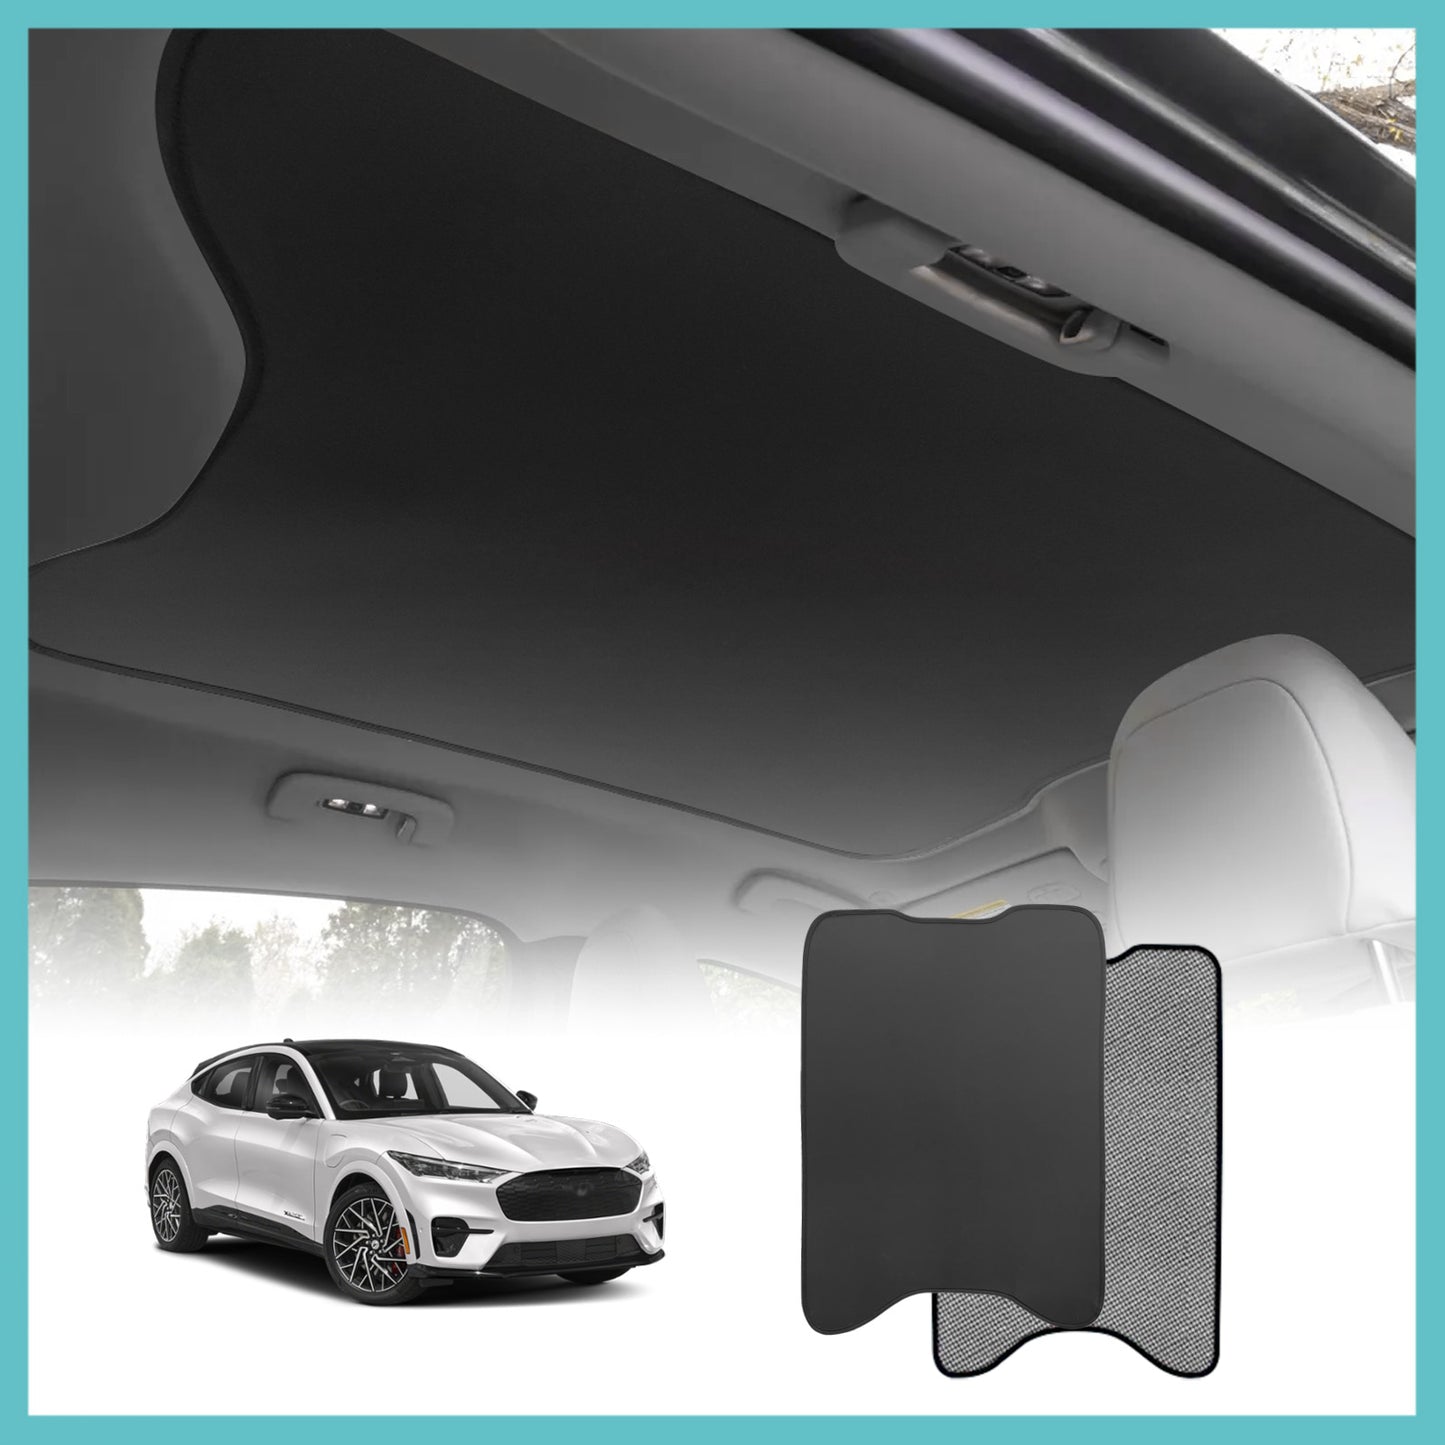 Mach E Foldable Roof Sunshade Upgraded Heat Reflective Tech Accessories from AOSKonology